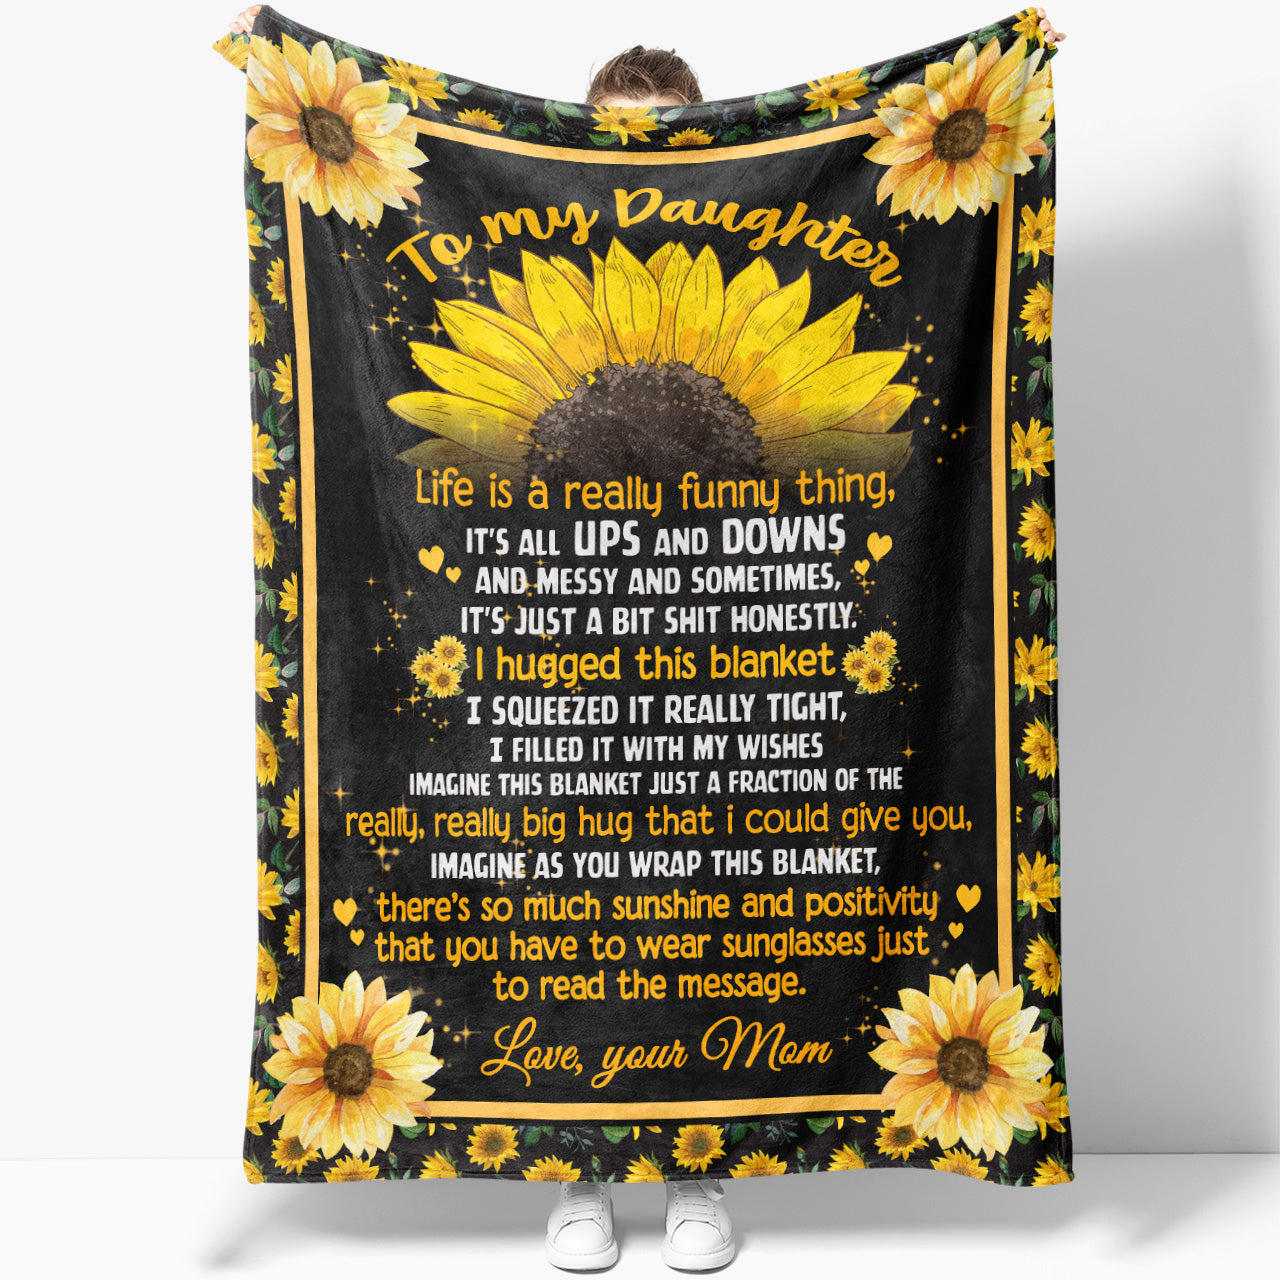 Funny Blanket Gift Ideas To My Daughter, Life is a Really Funny Thing All Ups and Downs Blanket